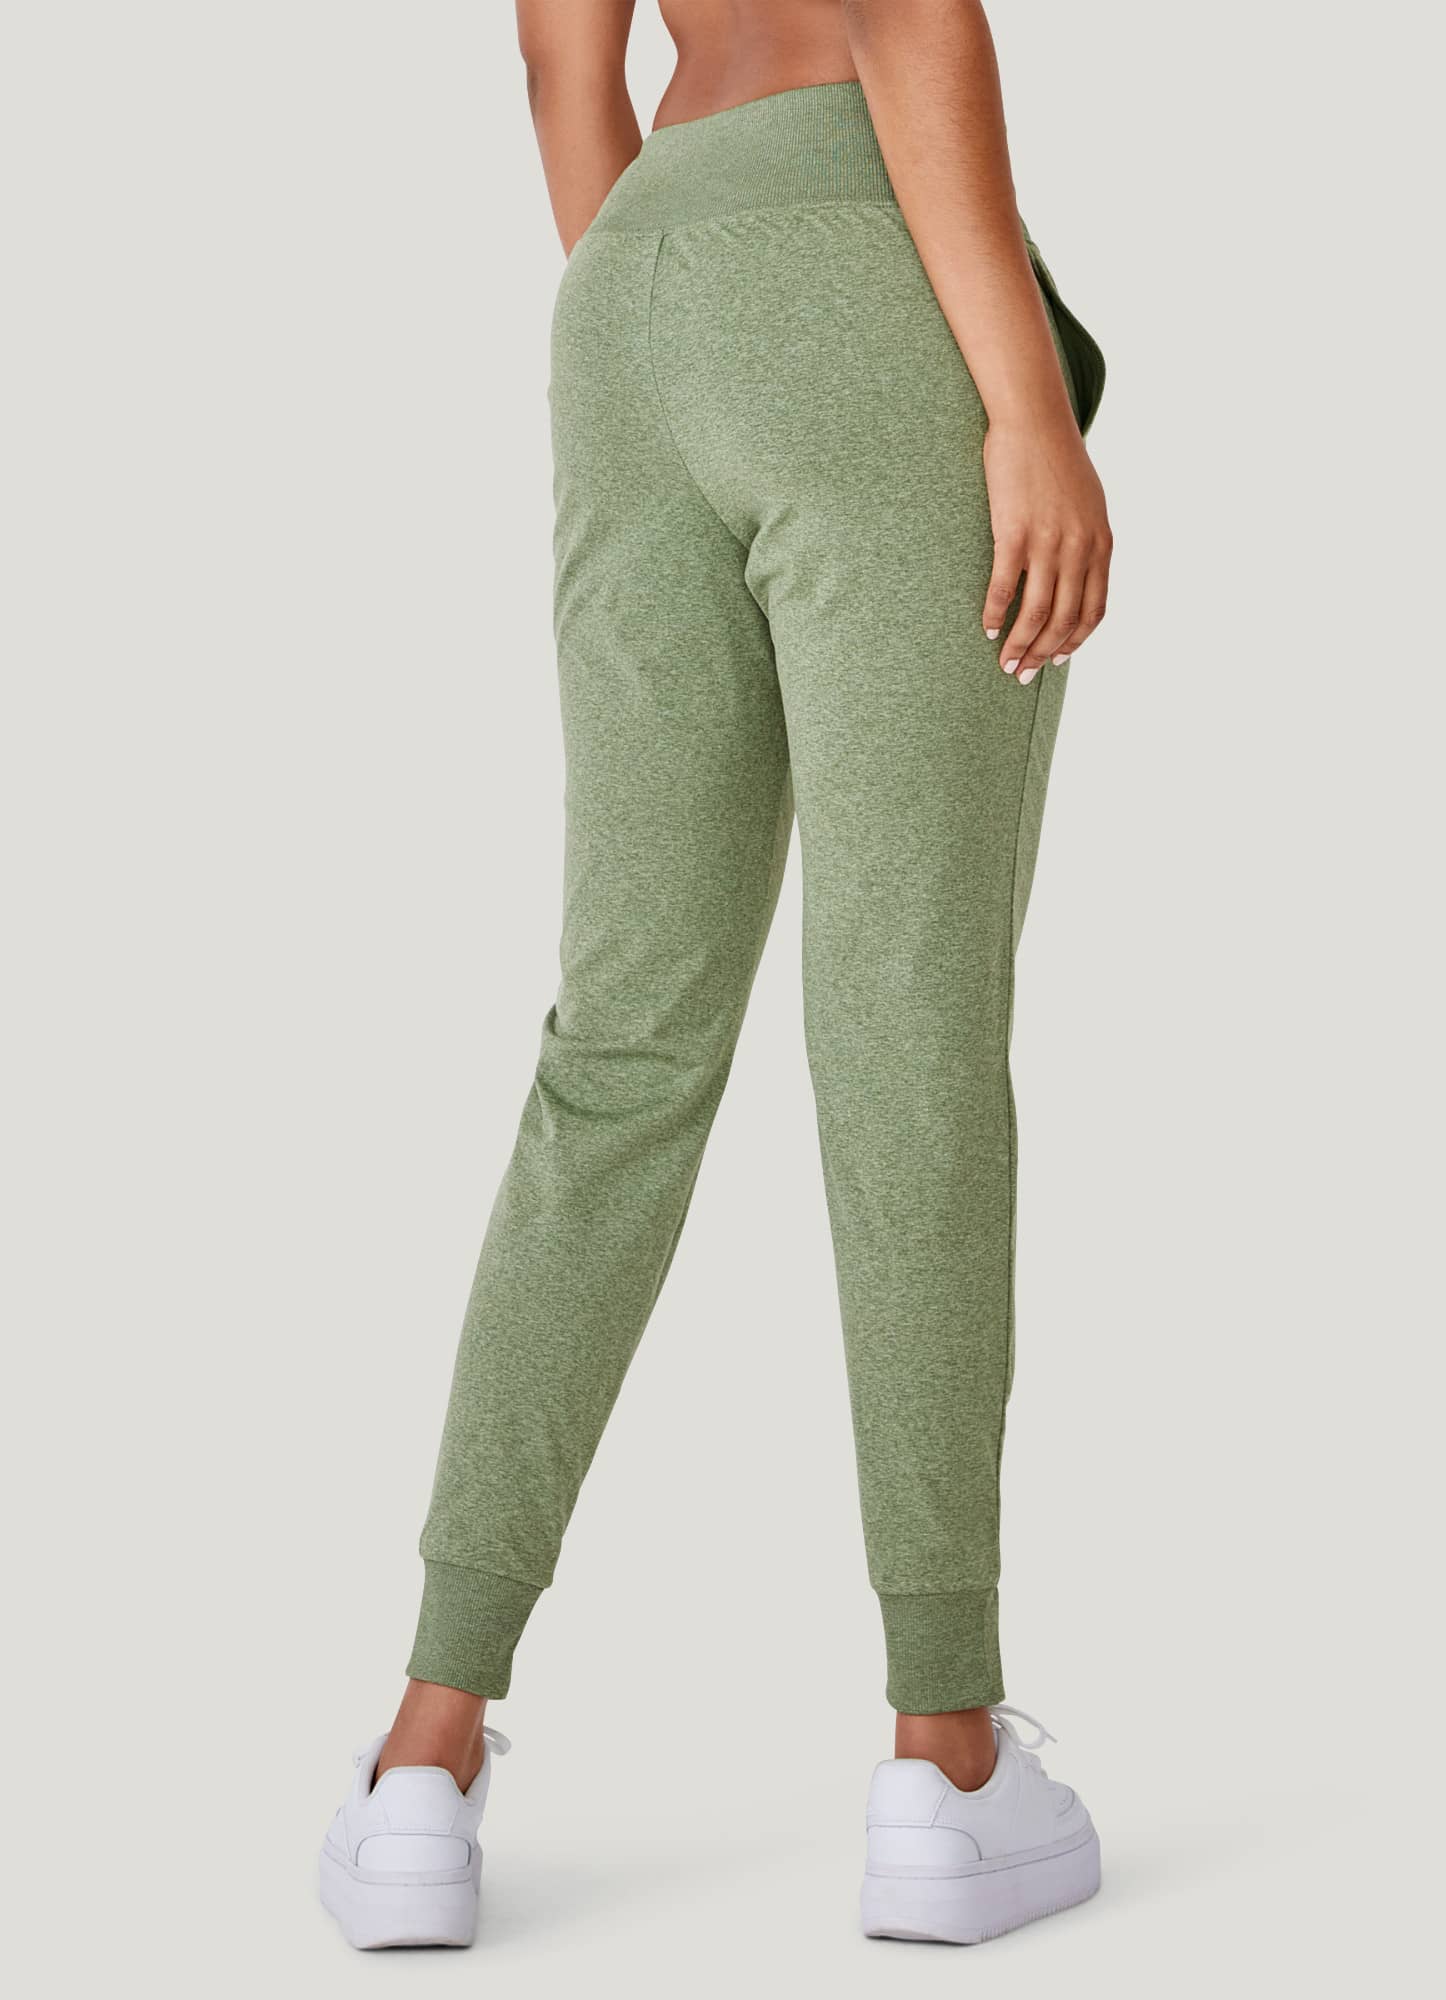 The Best Workout Pants for a Pear Shape Body - Lipgloss and Crayons